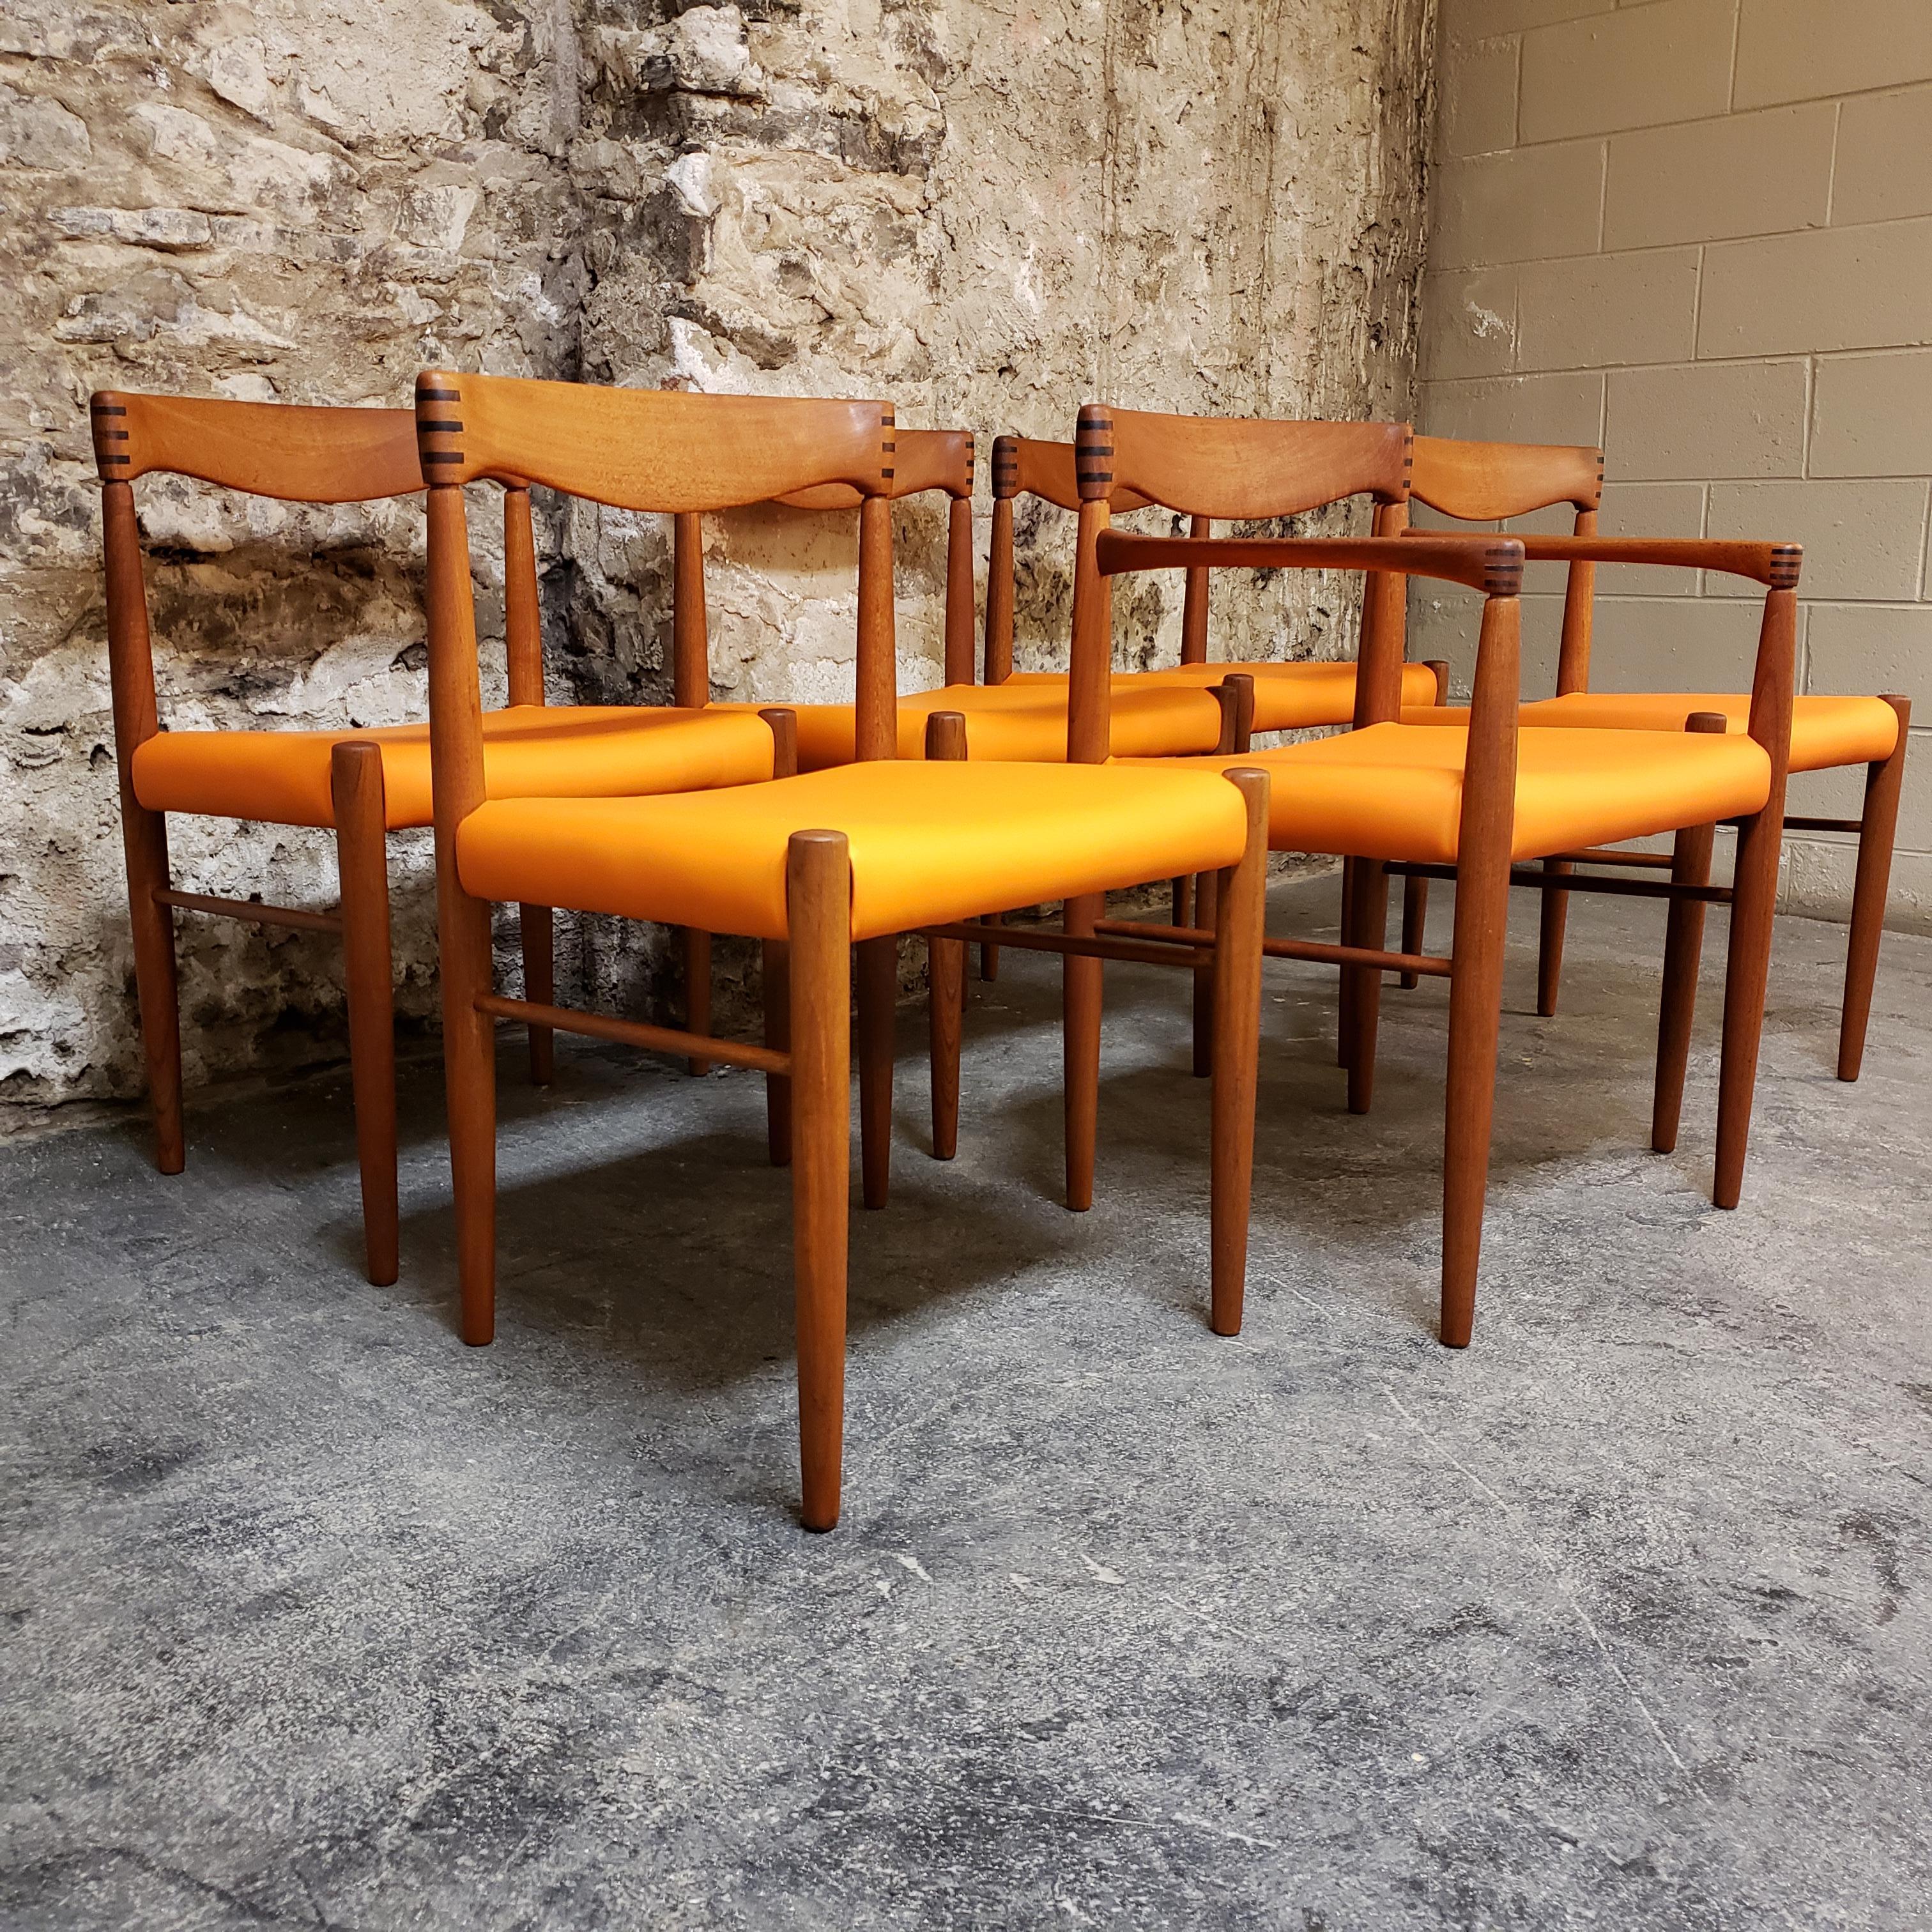 Set of 6 teak HW Klein for Bramin dining room chairs. They are beautifully sculpted and the backs feature ornate joining work. They have been reupholstered in a Maharam Alloy Navel vinyl. The set of 6 comes with one captains chair.

Scandinavian